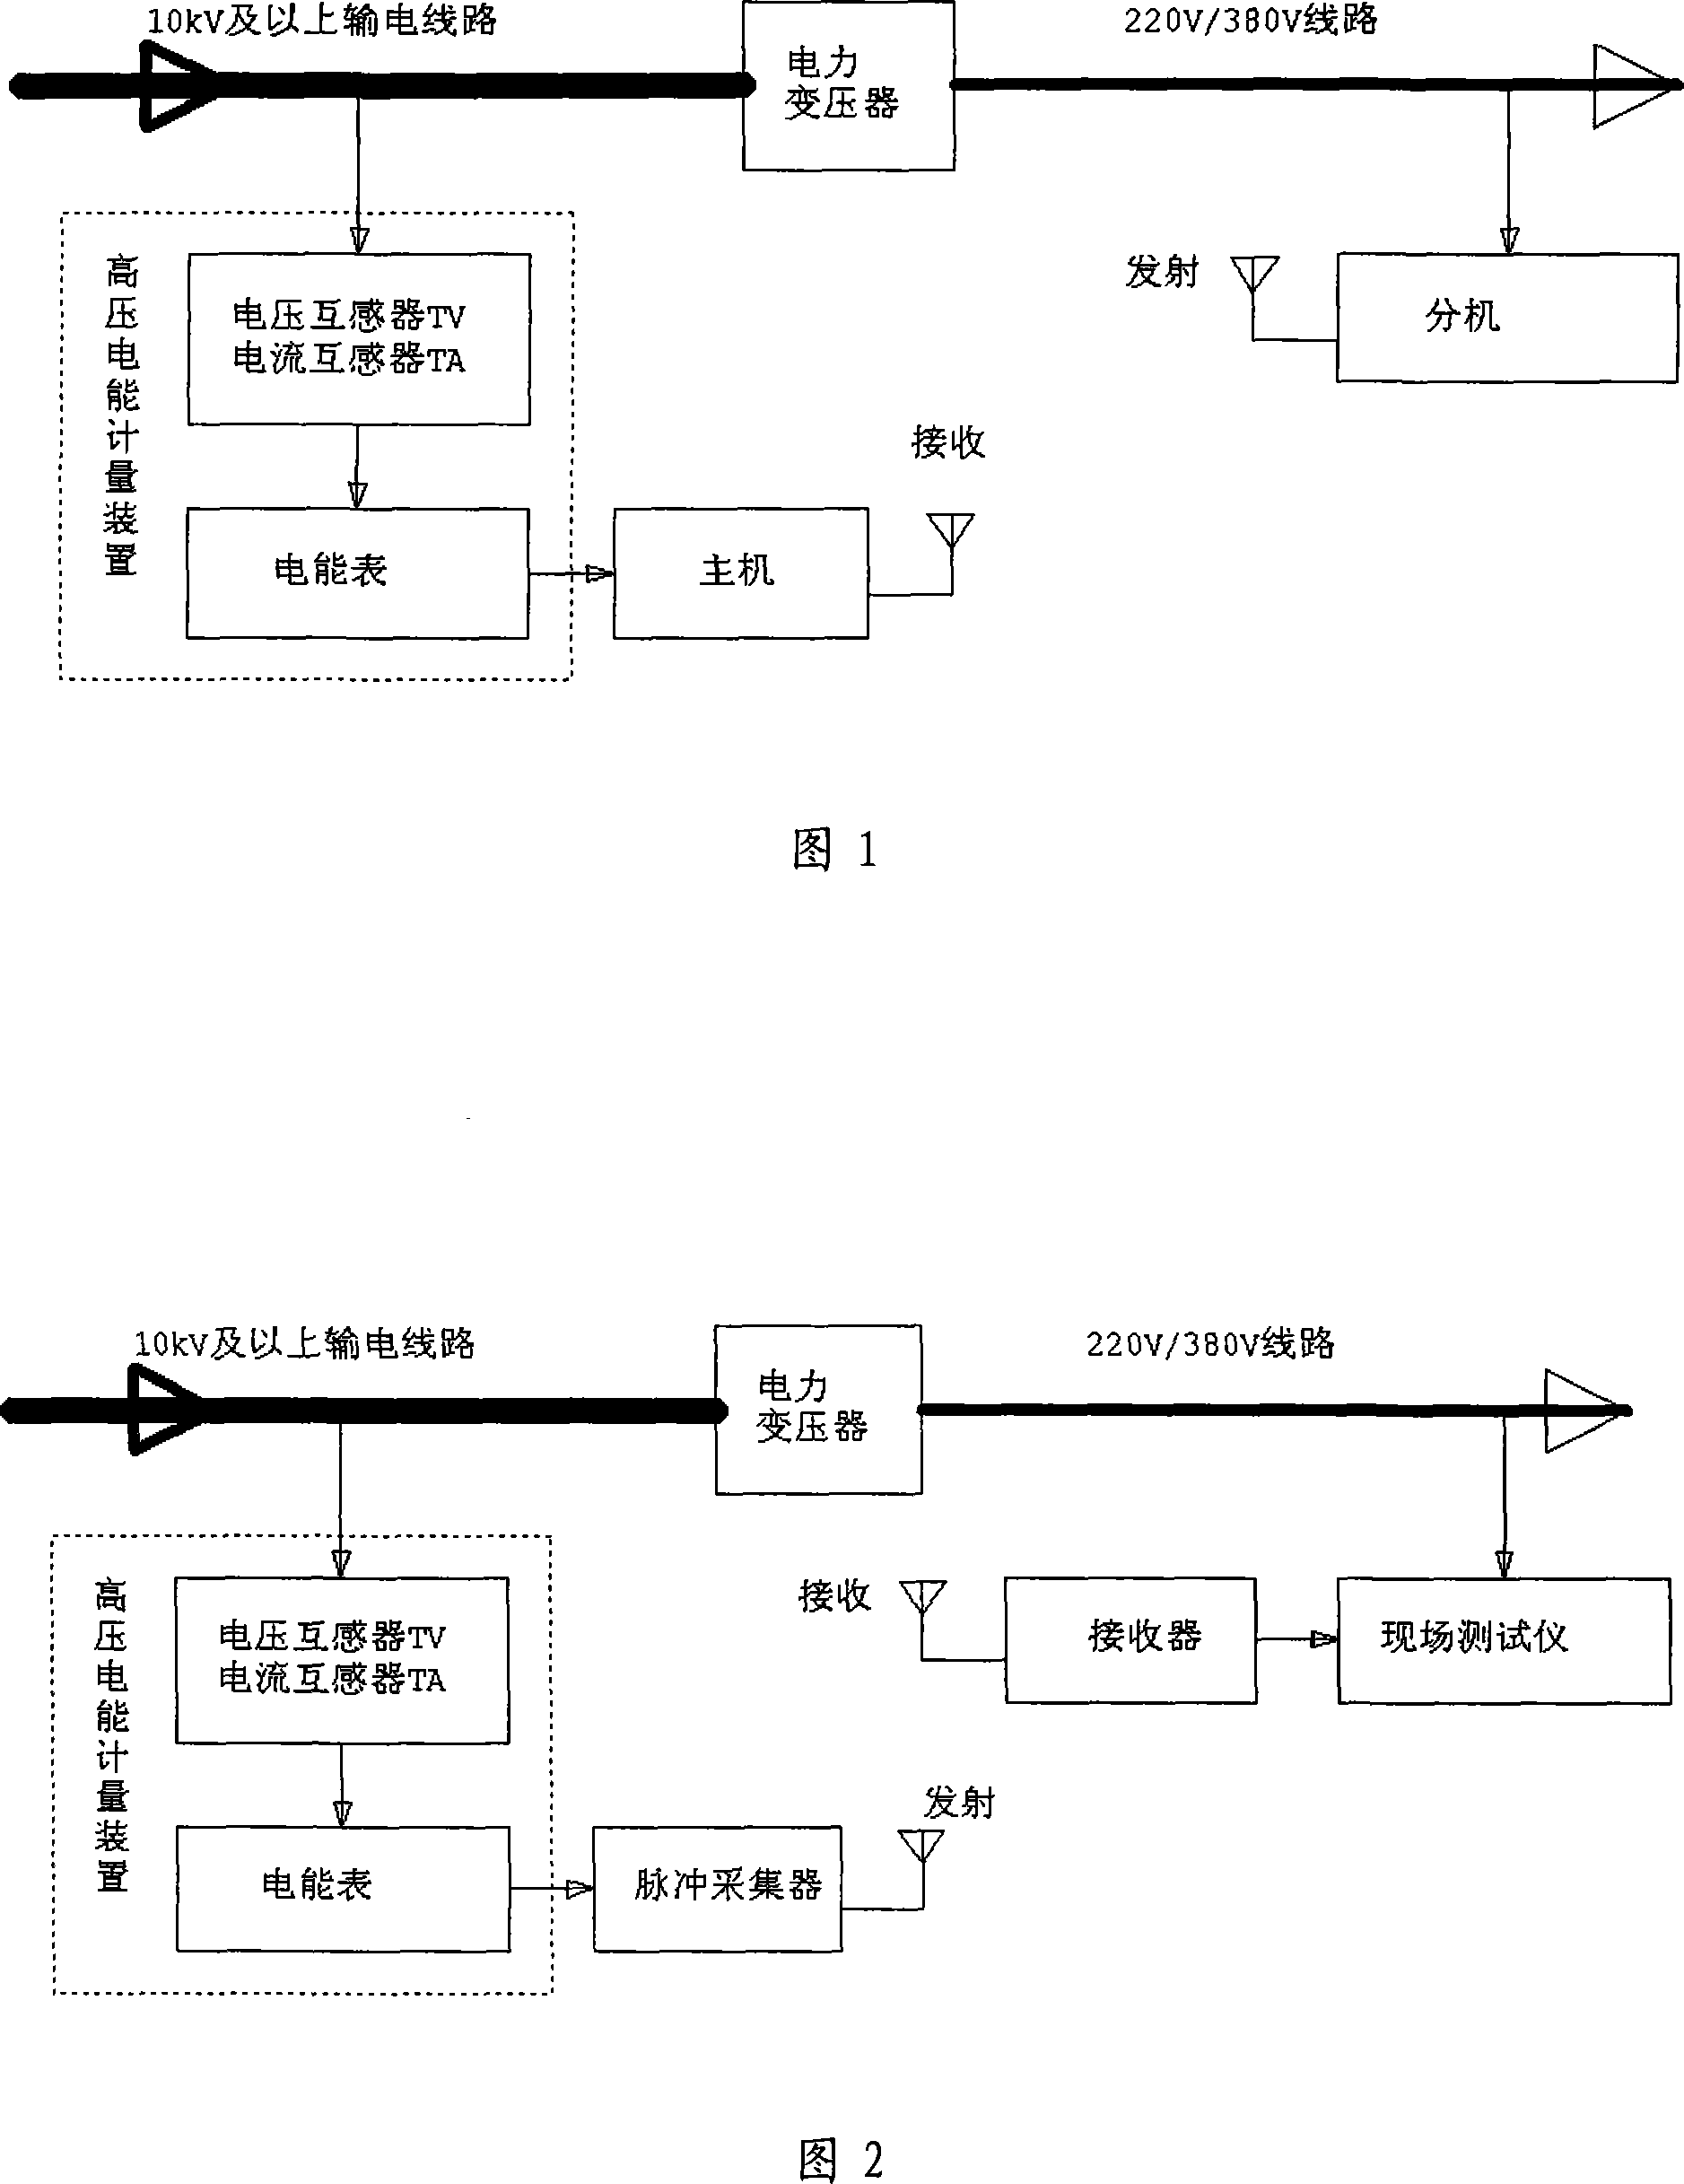 Method for testing synthetic measuring error of high tension electric energy metering installation